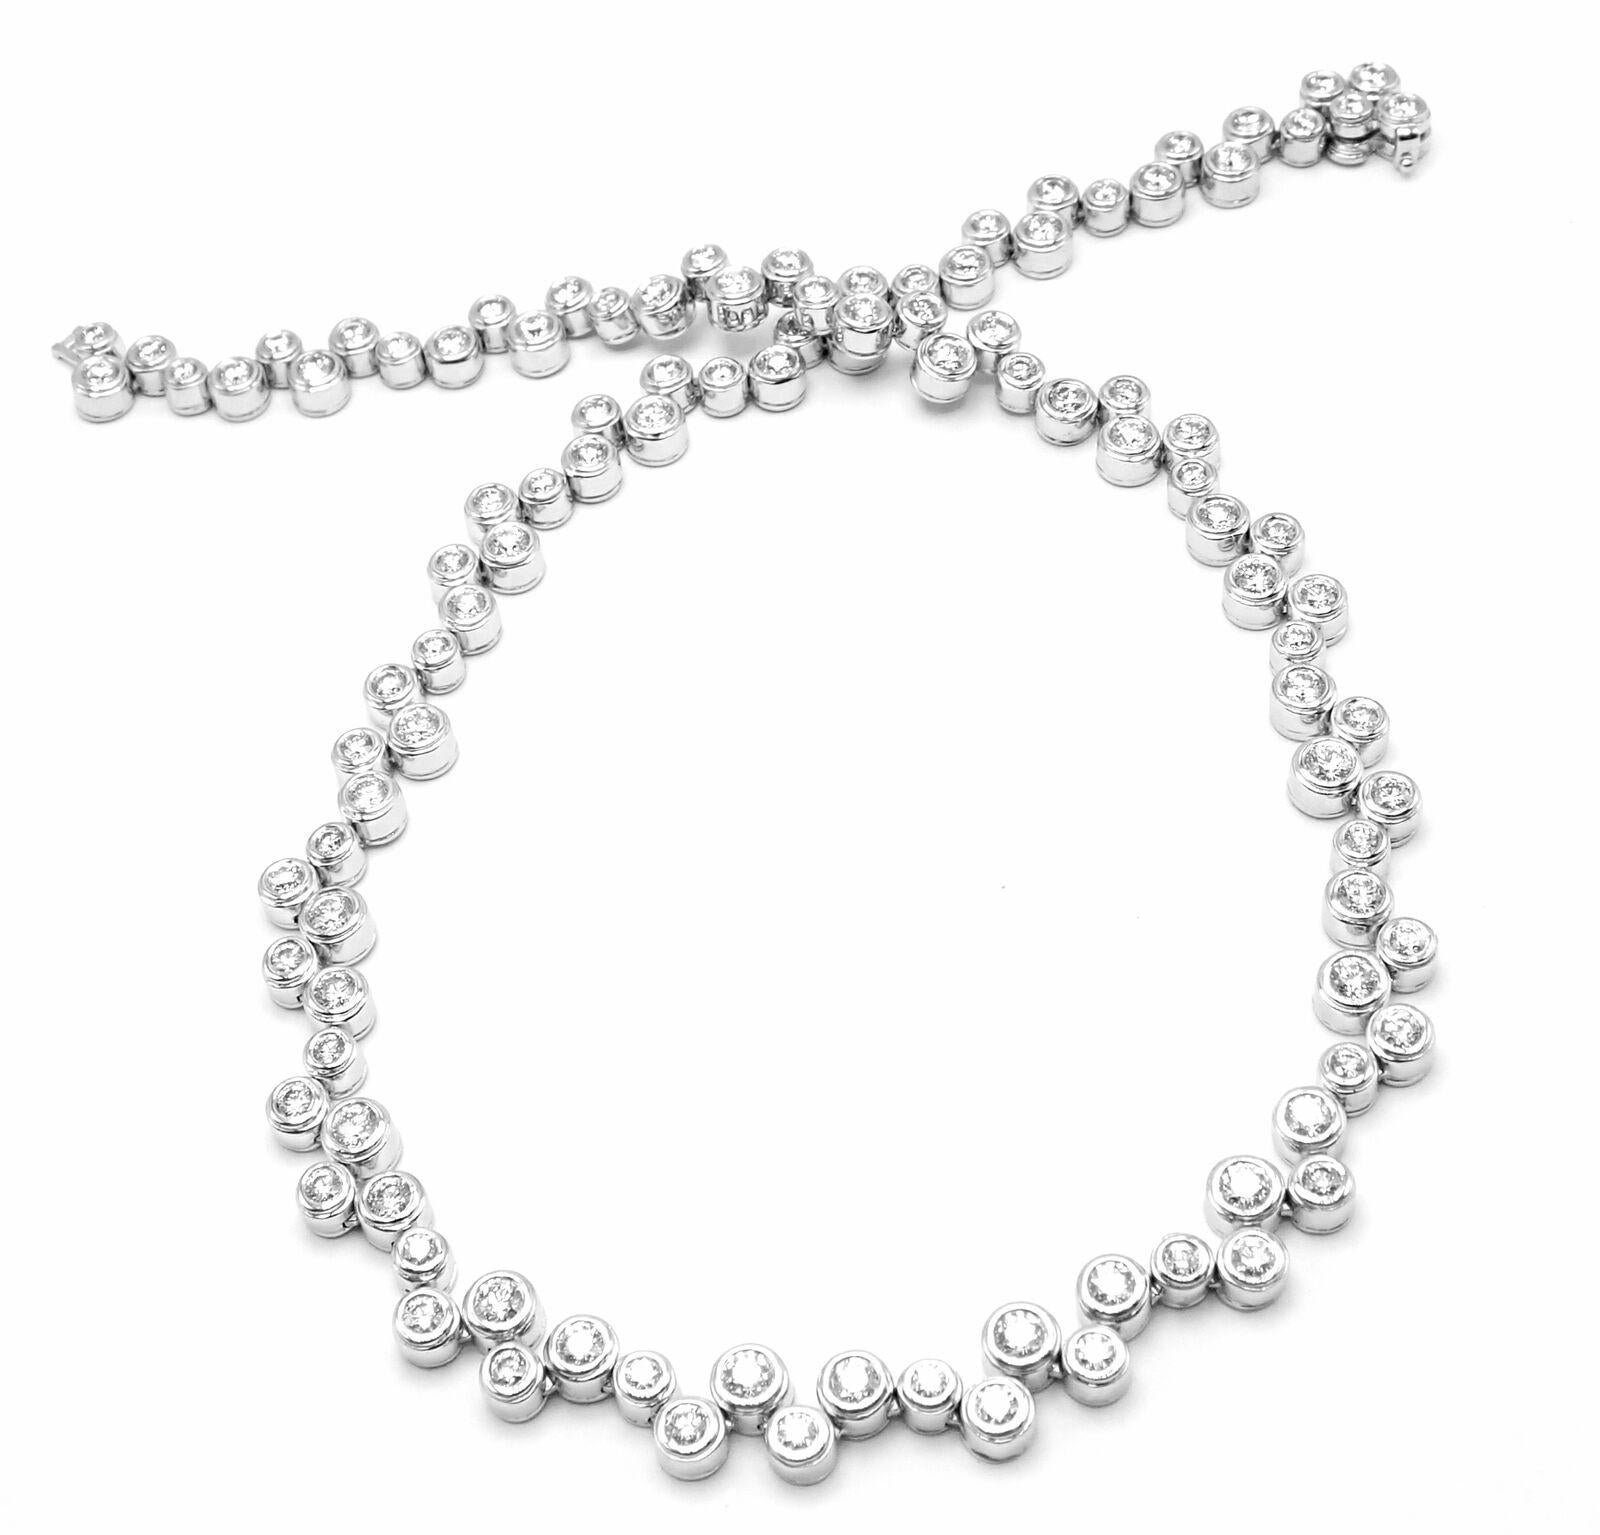 Platinum Diamond Bubbles Necklace by Tiffany & Co. 
With 108 round brilliant cut diamonds VS1 clarity, G color total weight is approximately 10ct.
Details: 
Length: 15